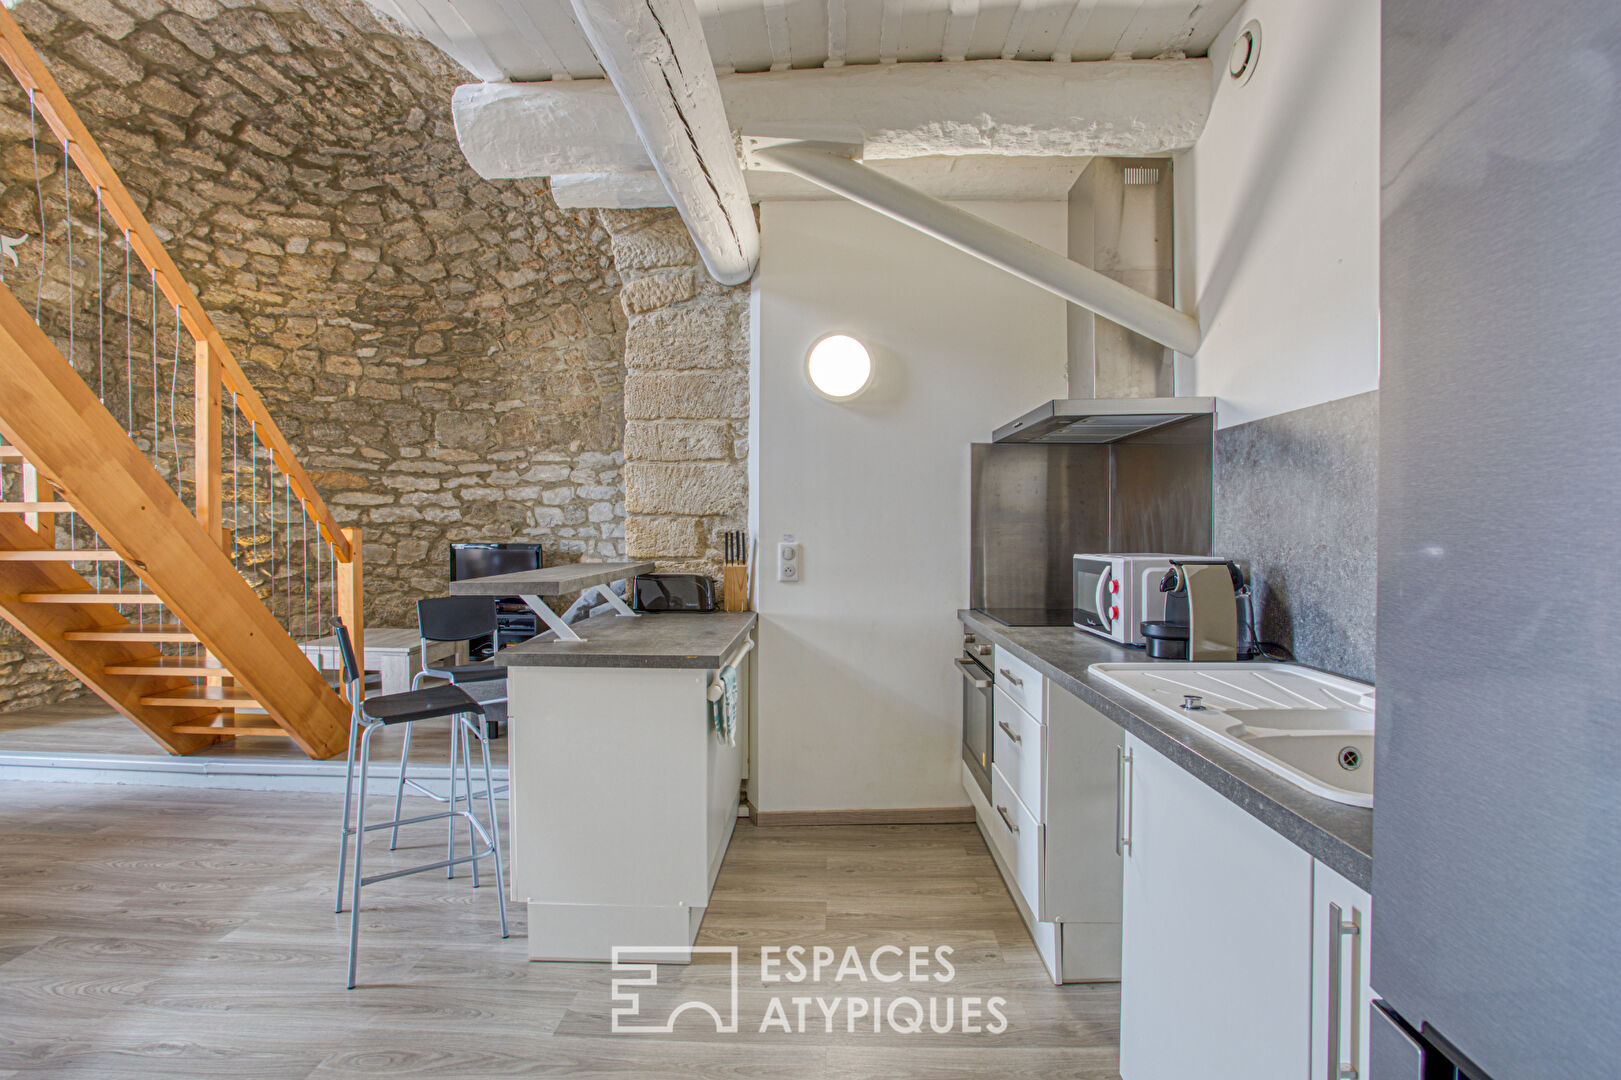 Charming atypical duplex in the heart of the village